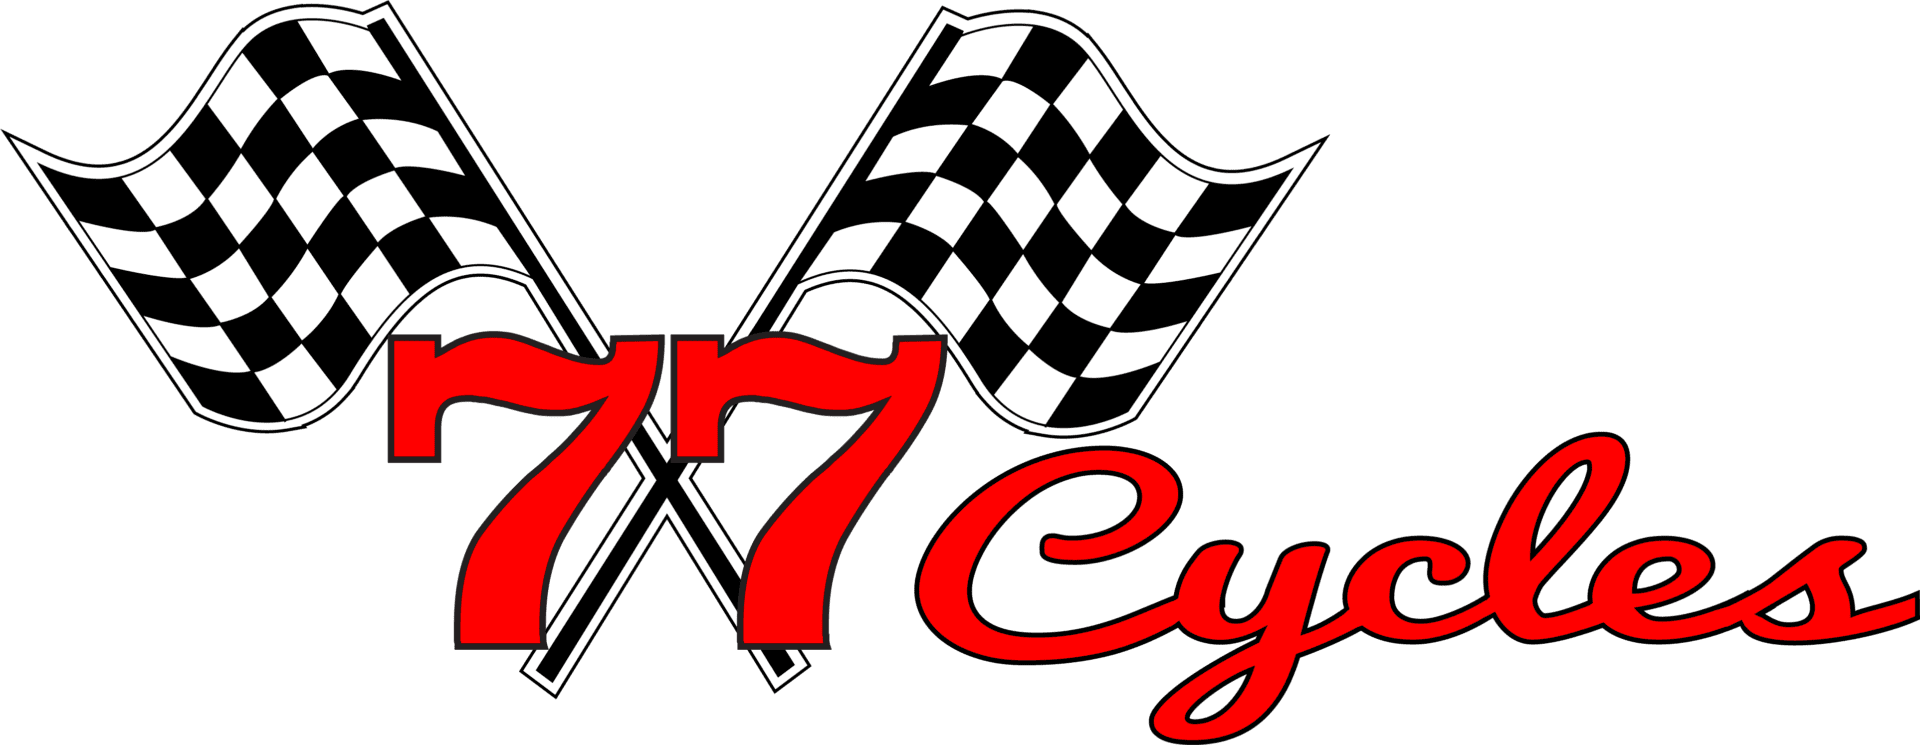 77 Cycles logo red